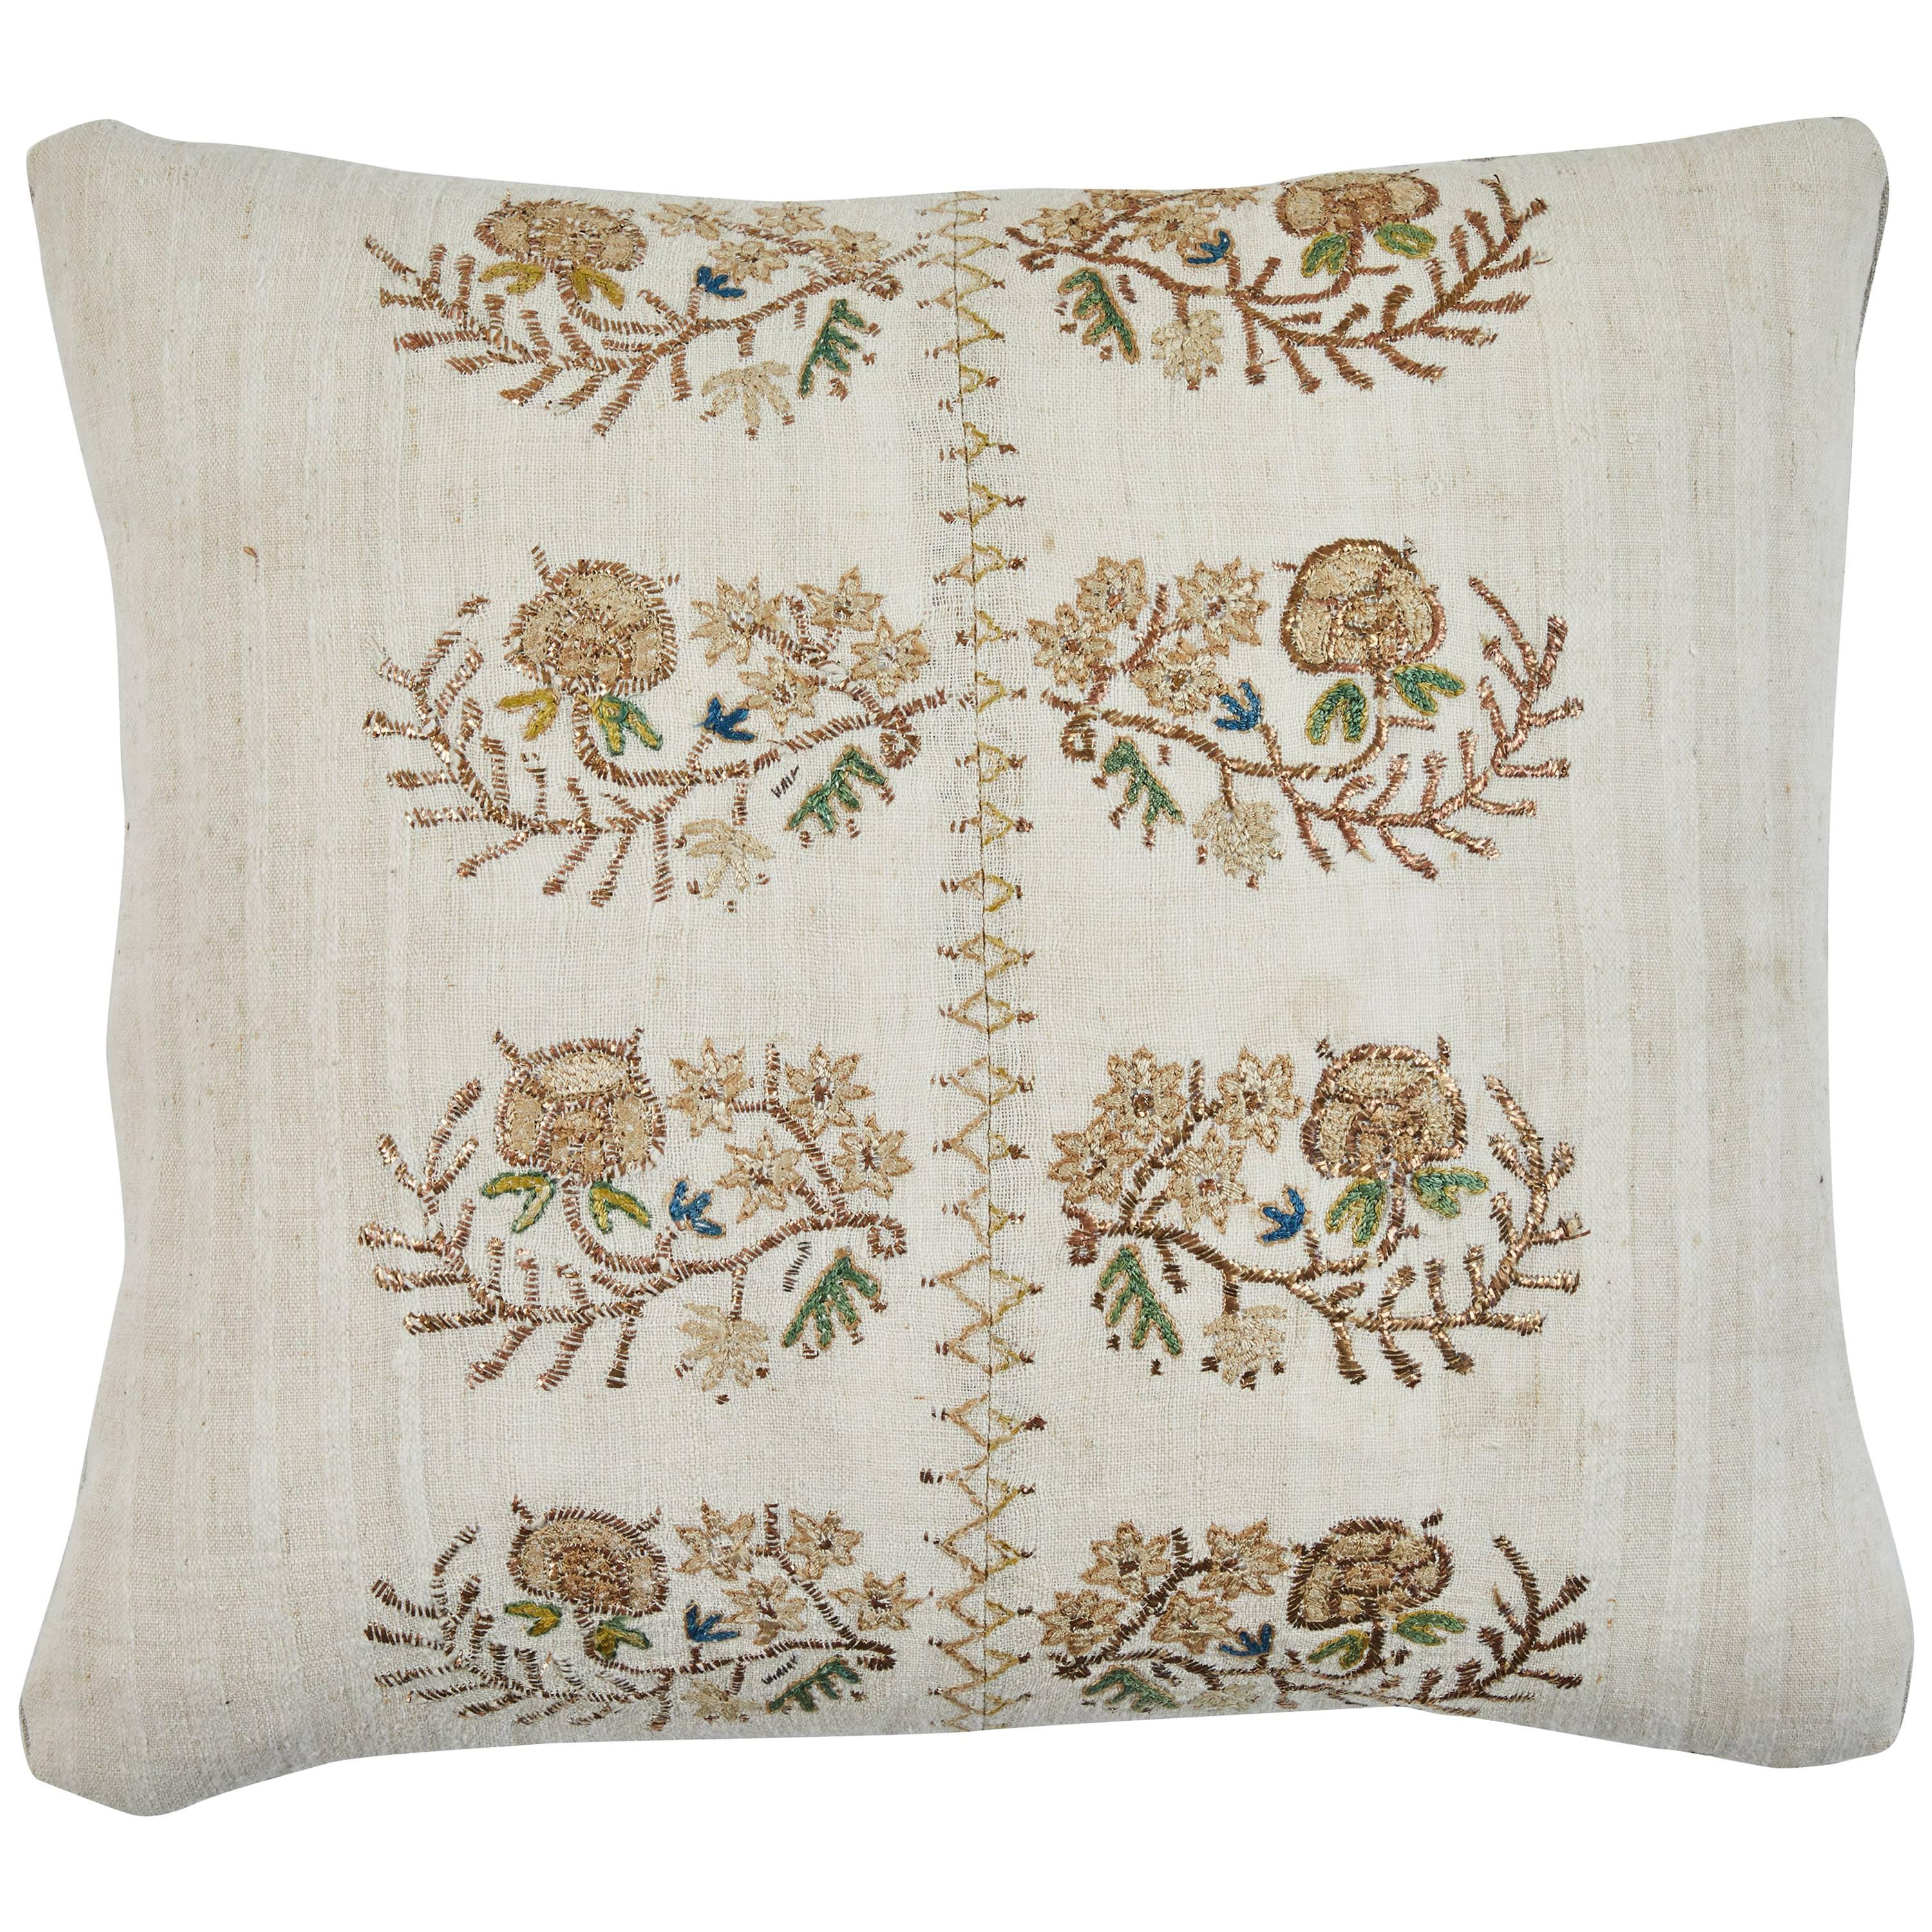 Antique Turkish Ottoman Embroidery Pillow For Sale